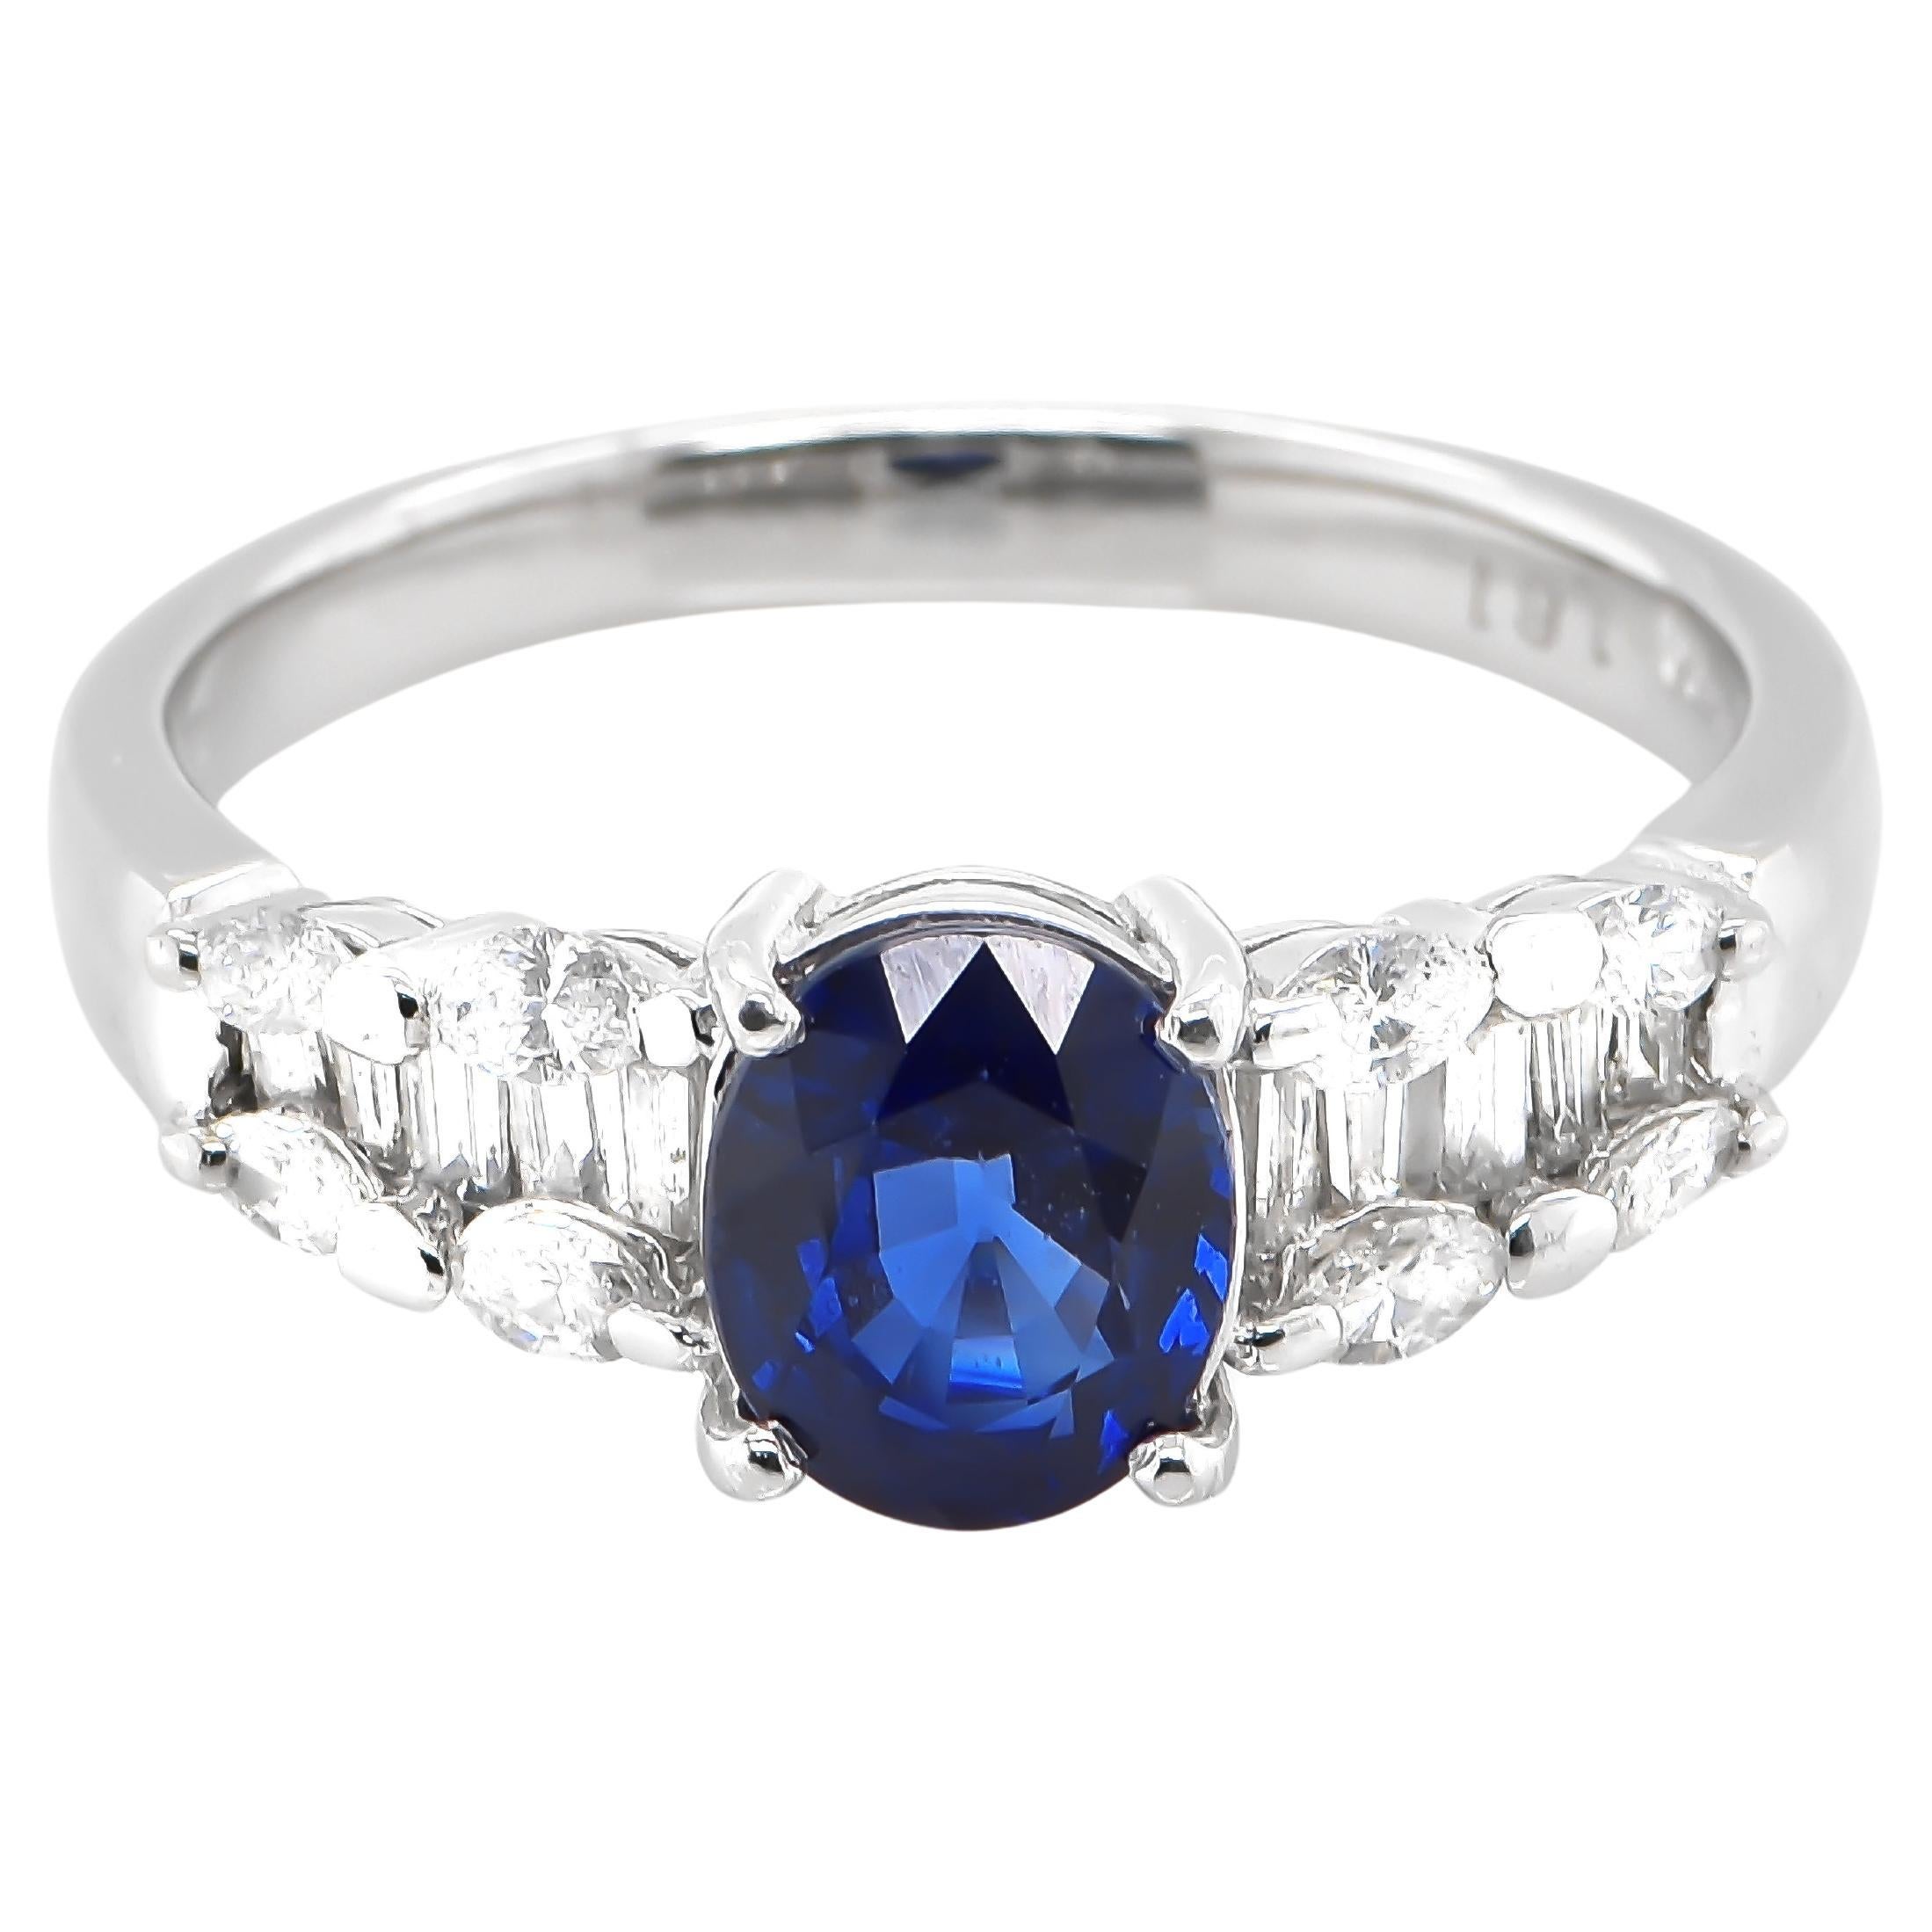 1.61 Carat Natural Royal Blue Sapphire and Diamond Ring Made in Platinum